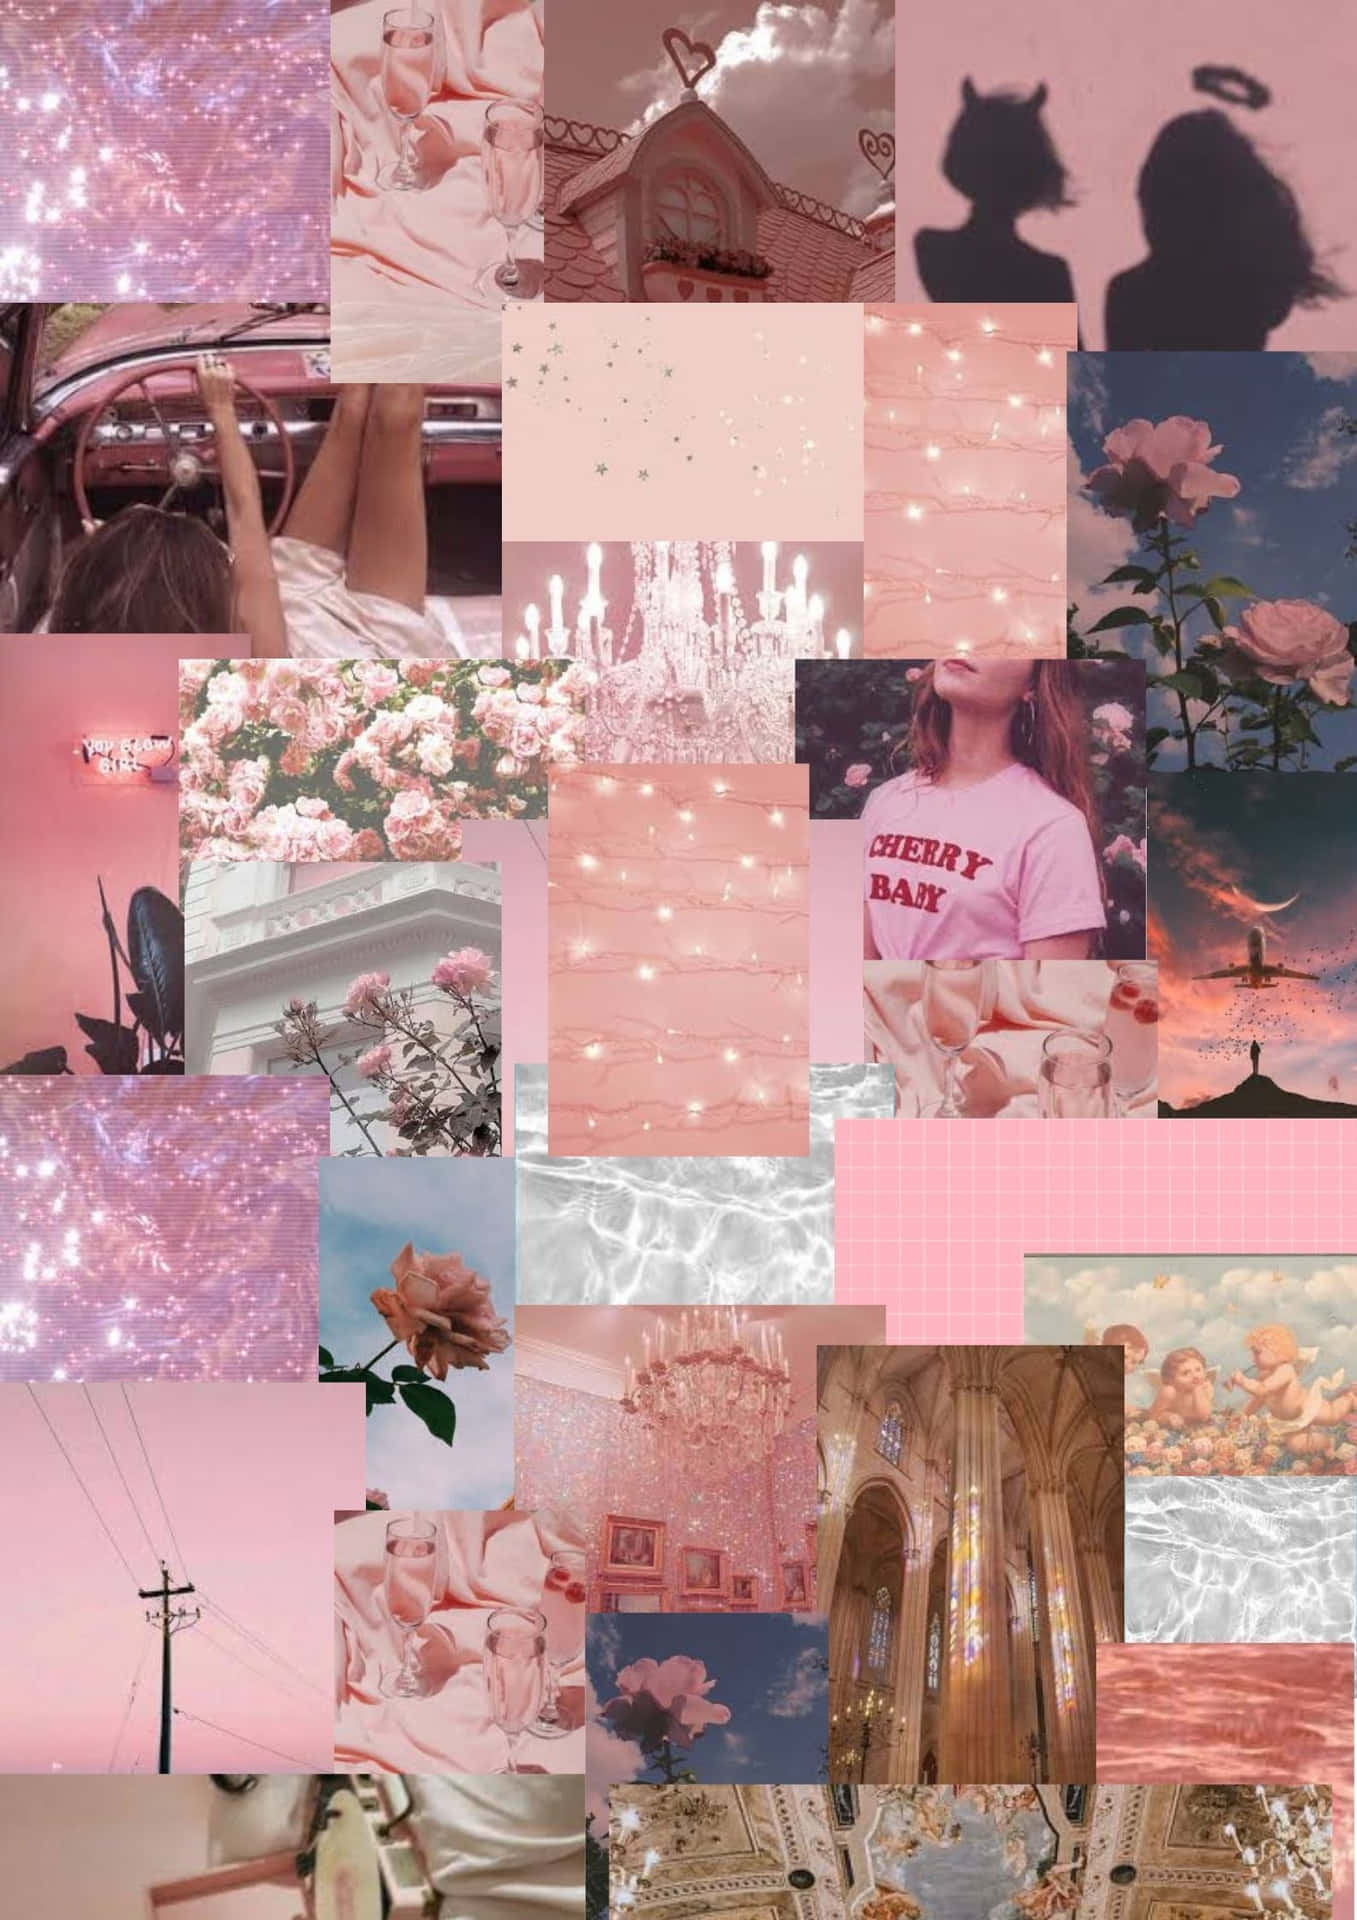 Bring creativity to your desktop with this beautiful pink collage wallpaper. Wallpaper